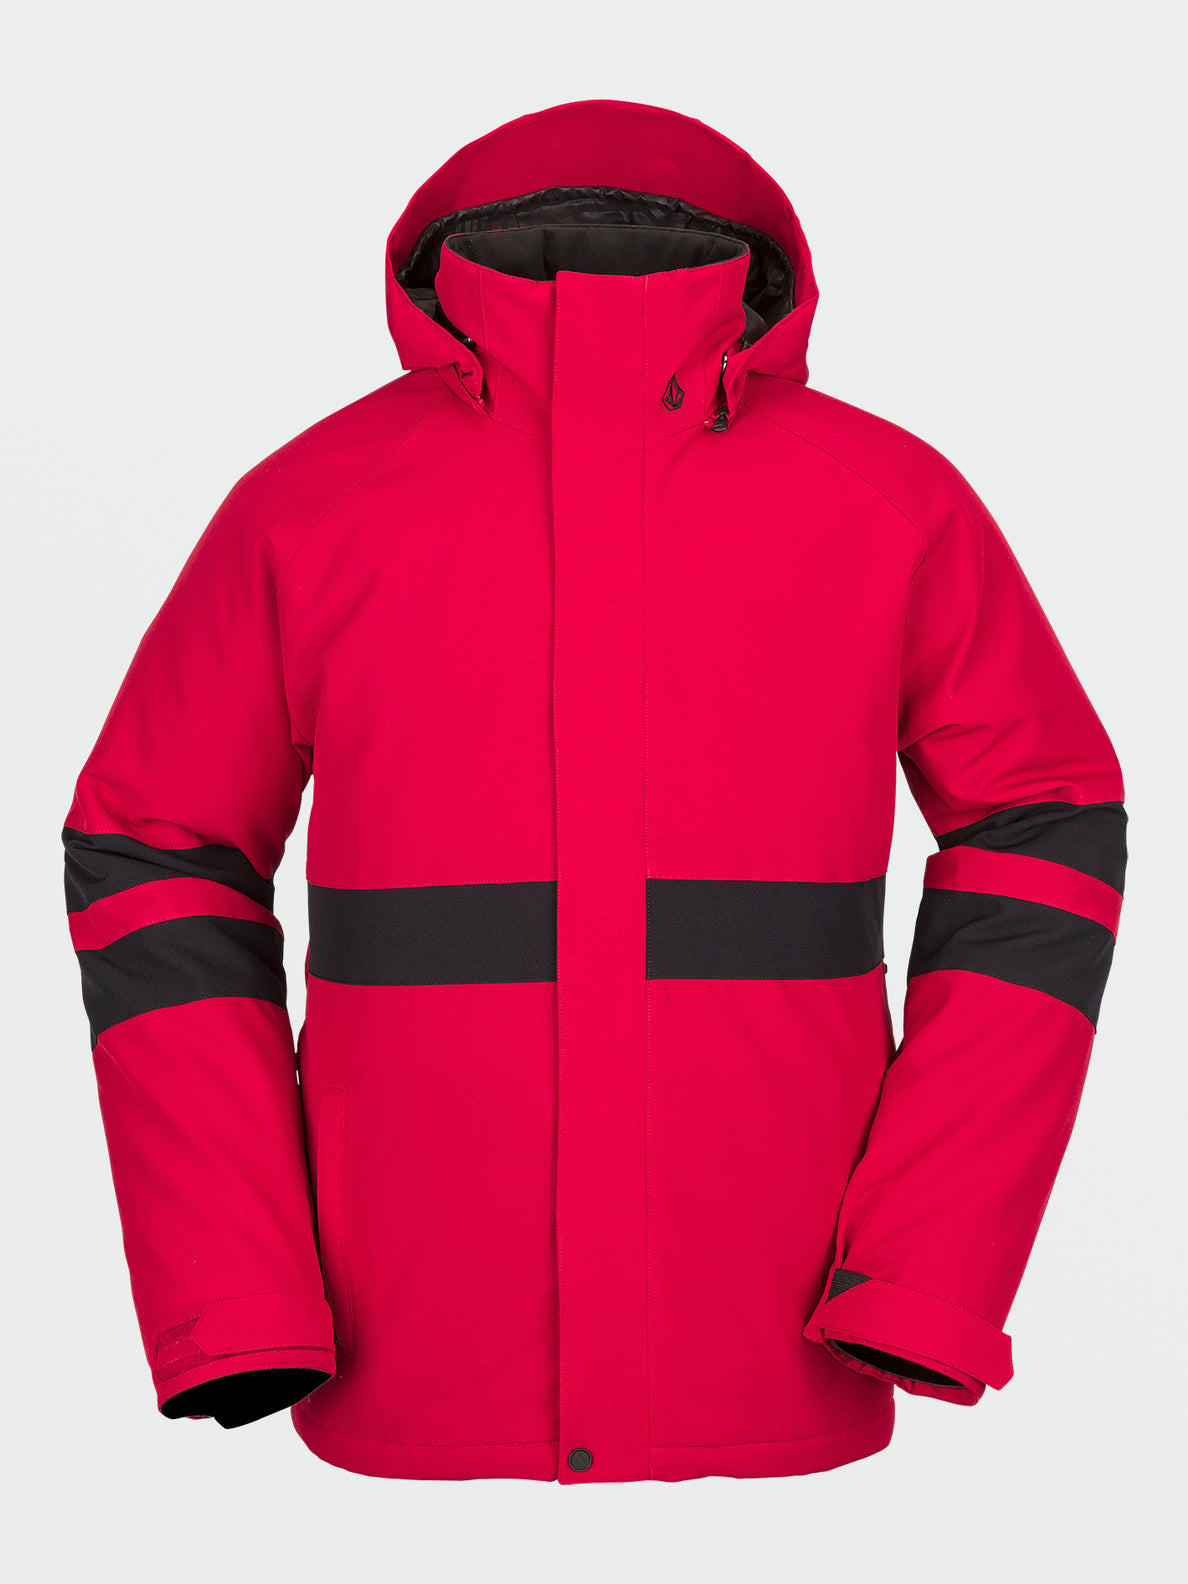 Mens Jp Insulated Jacket - Red – Volcom Japan